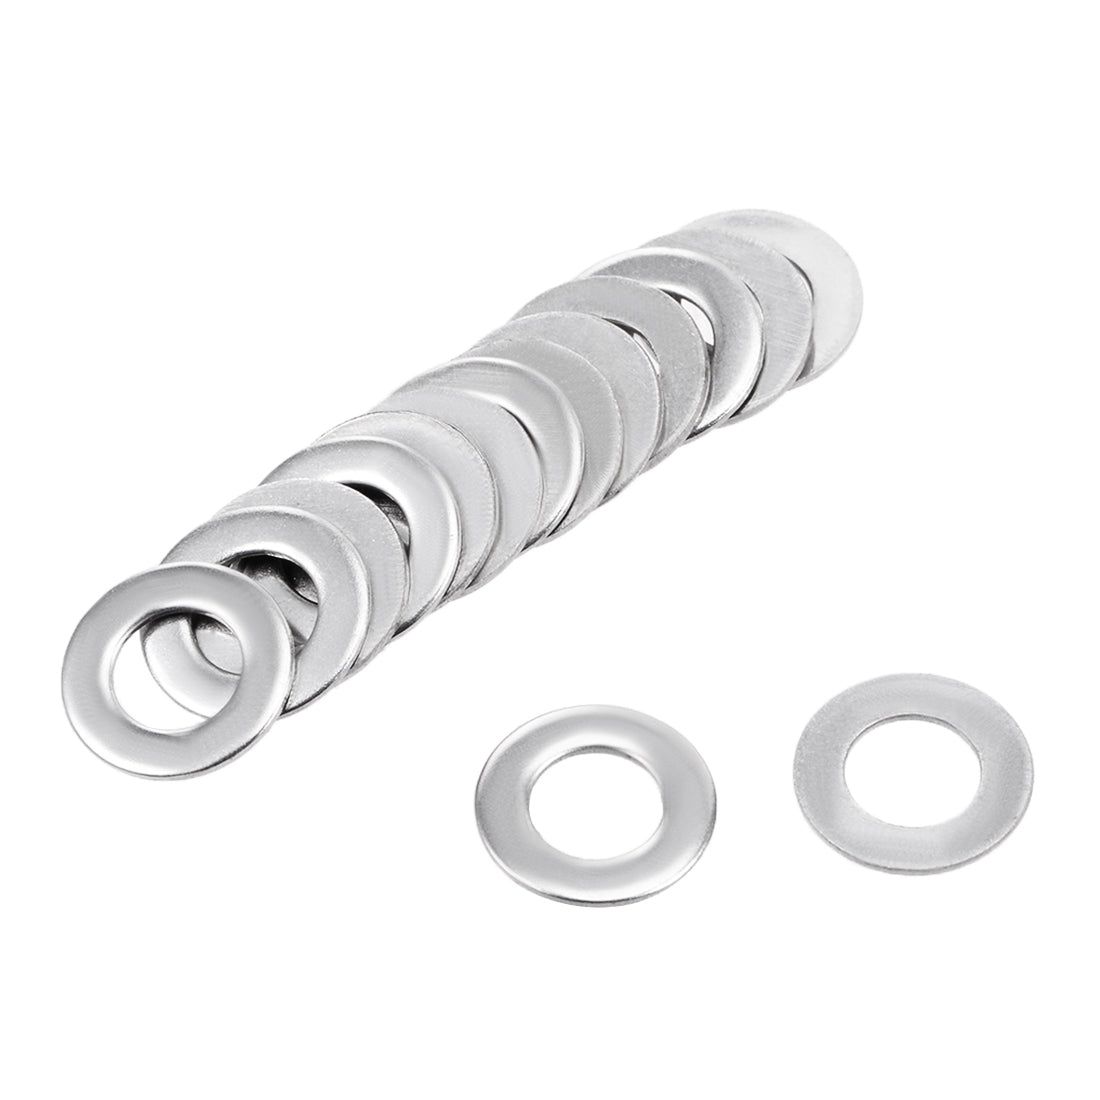 uxcell Uxcell 50Pcs 6mm x 12mm x 0.8mm 304 Stainless Steel Flat Washer for Screw Bolt